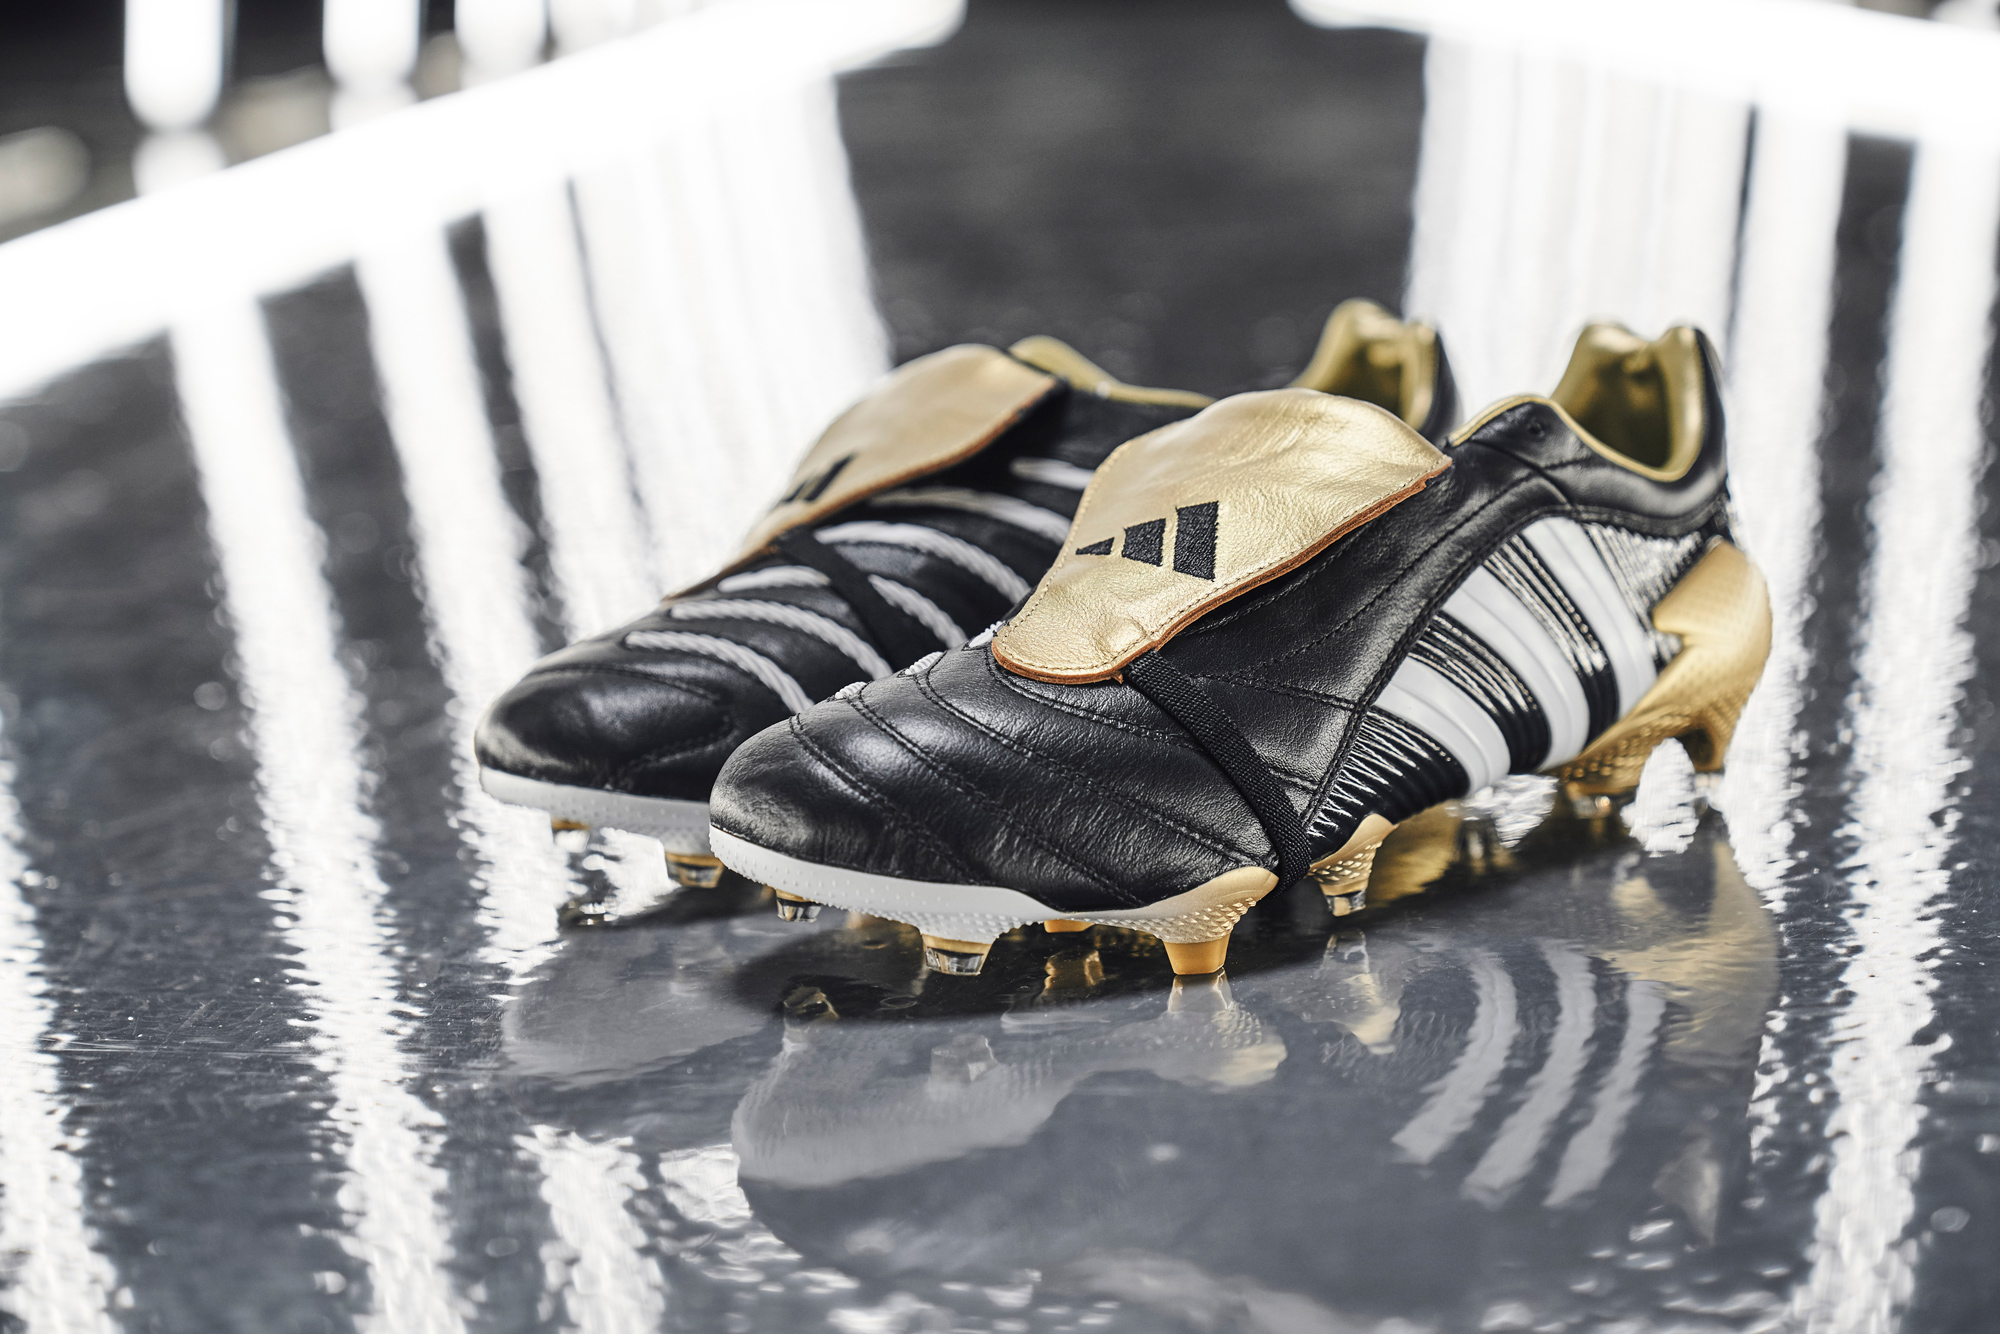 Adidas Predator Pulse review: A fresh take on an icon of the game |  FourFourTwo